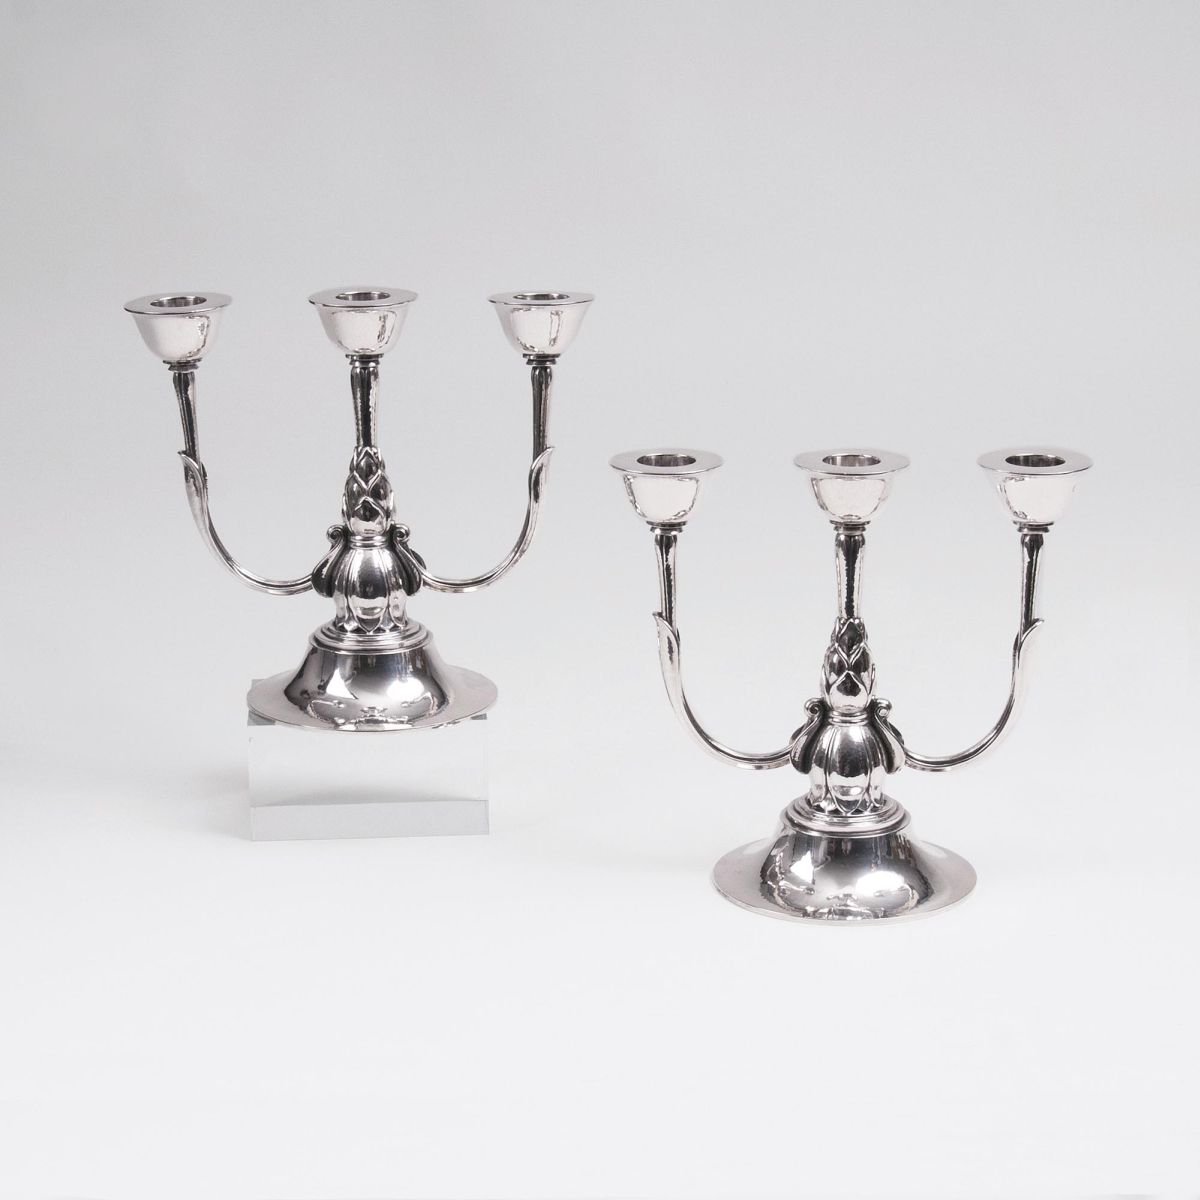 A Pair of Rare Three-Armed Candle Holders